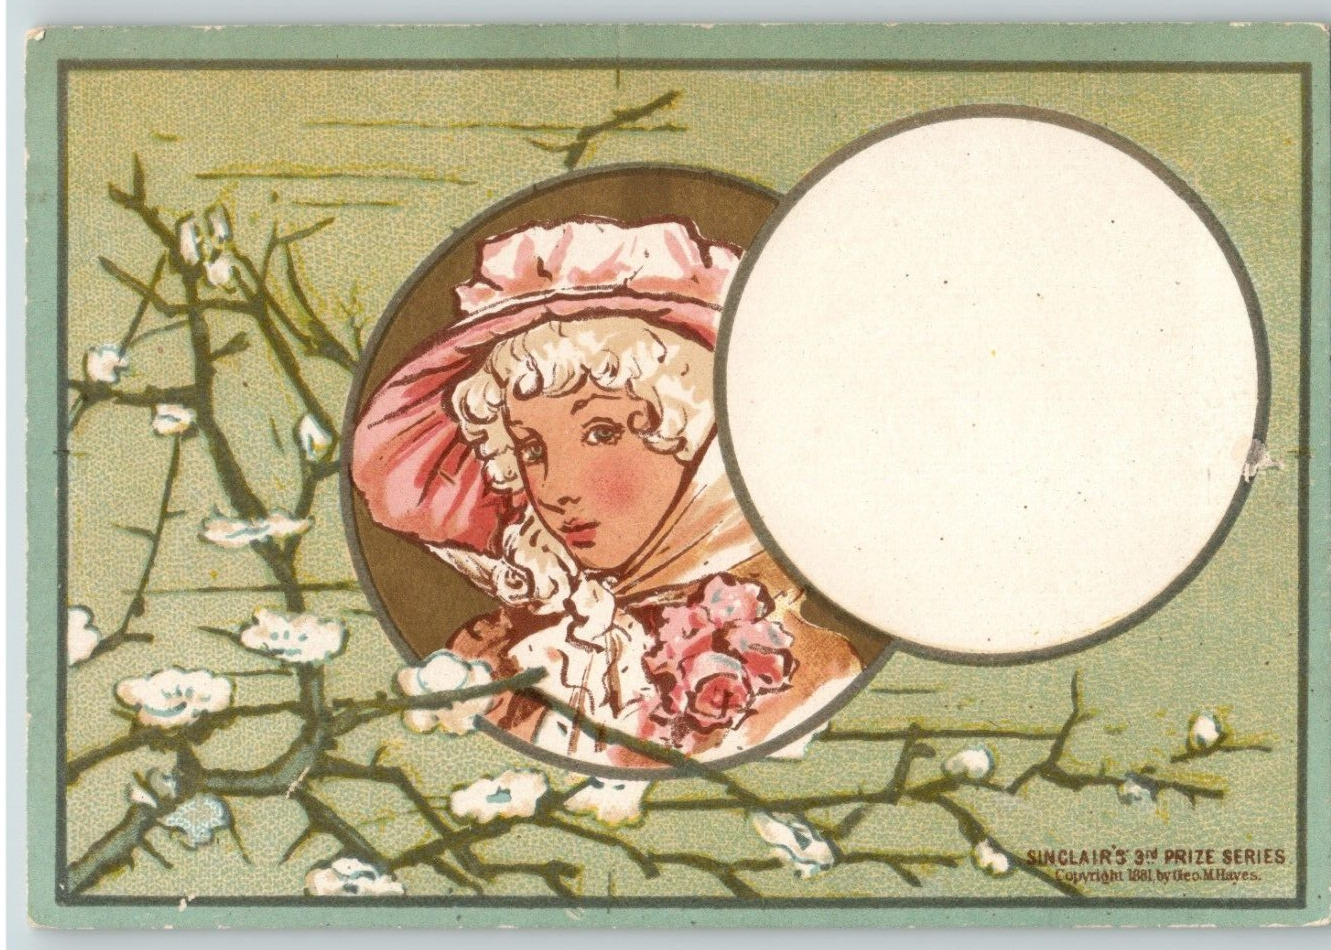 ART NOUVEAU LADY - SINCLAIR\'S 3RD PRIZE SERIES 1881 GEO. M. HAYES TRADE CARD